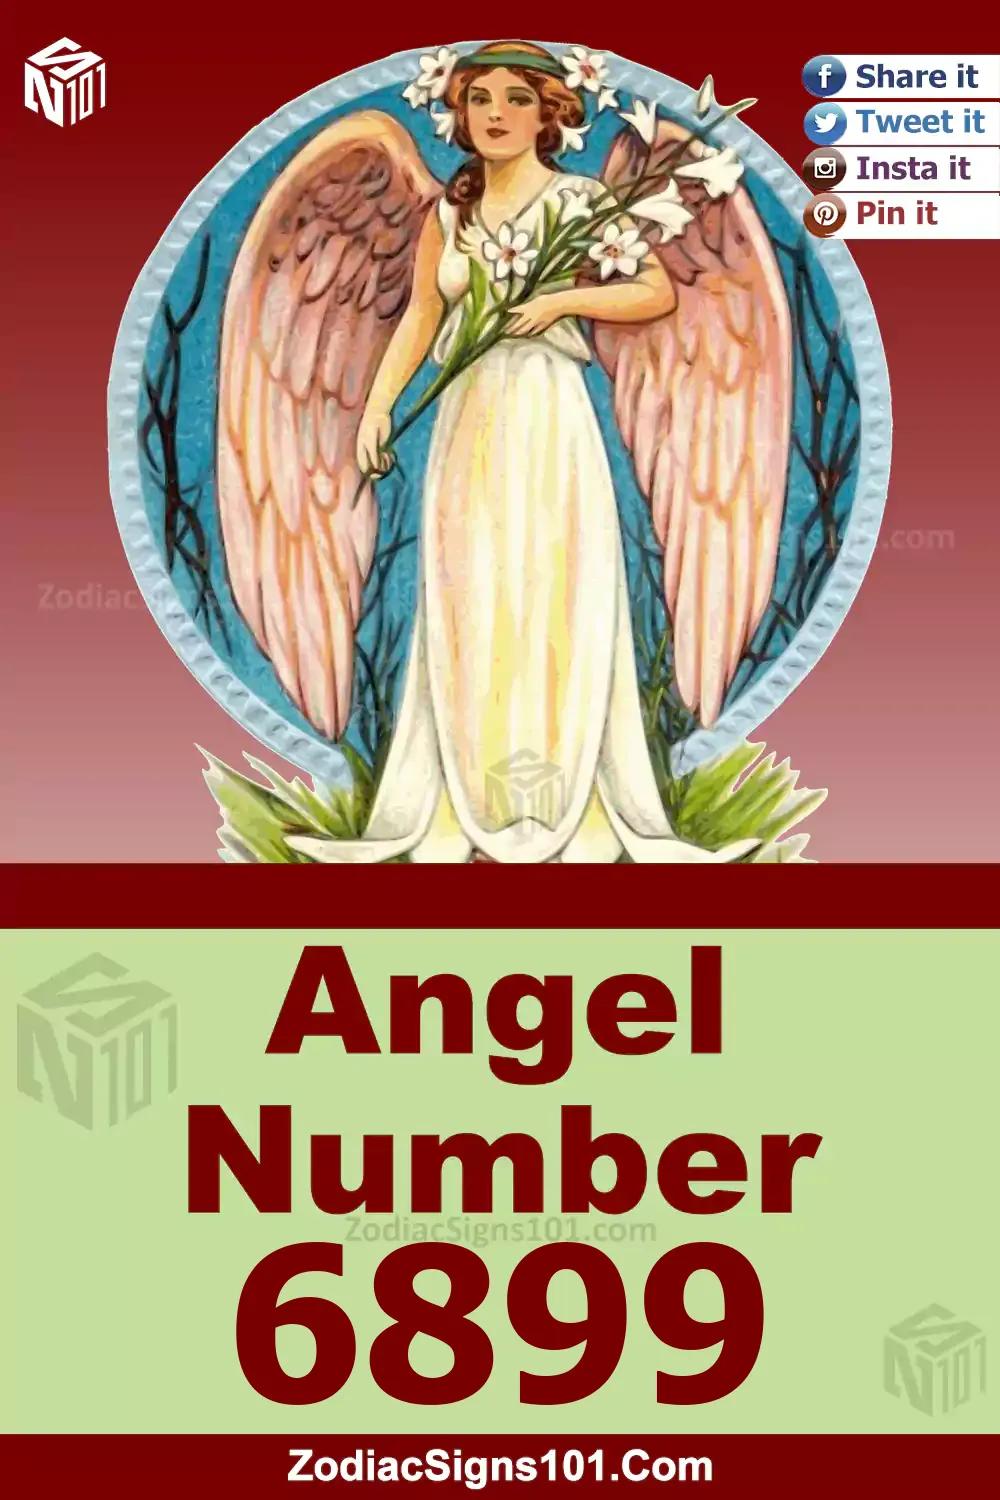 6899 Angel Number Meaning